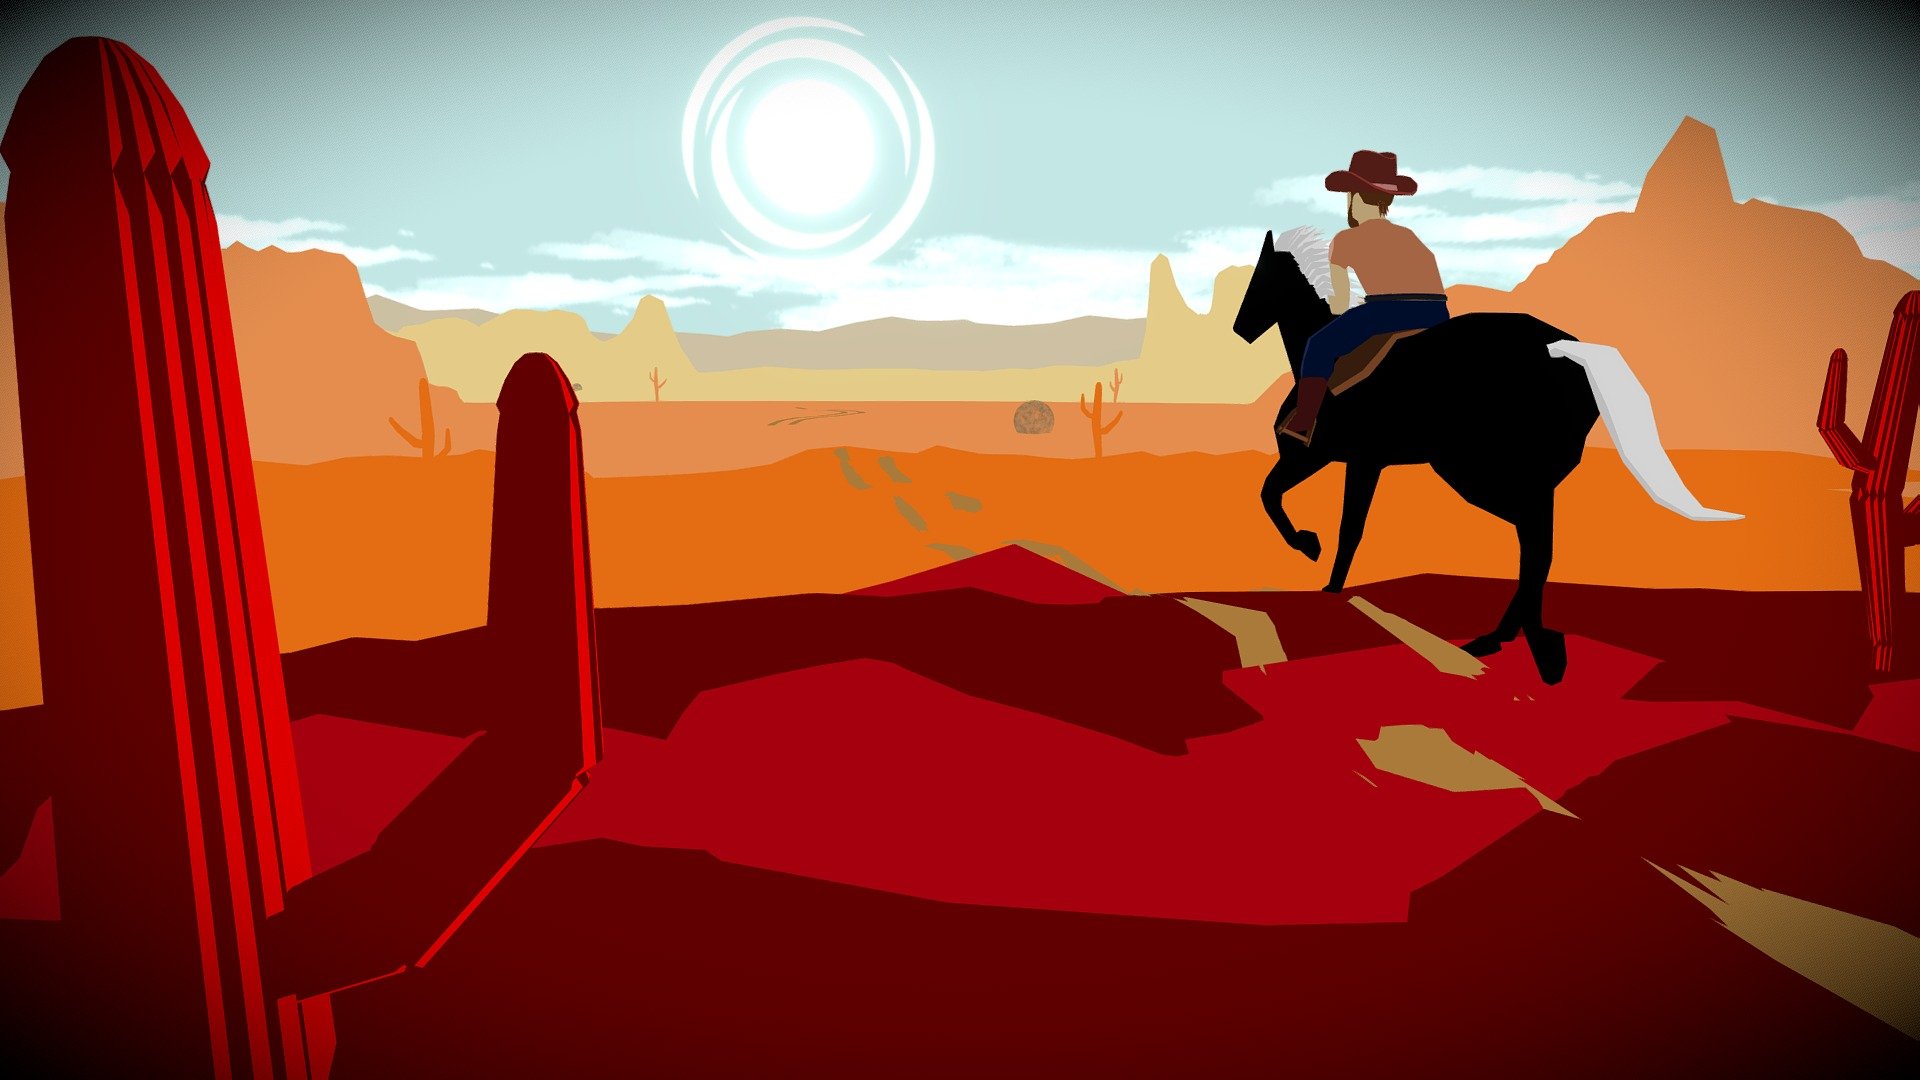 My entry for the February Challenge of Frontiers. Here we have a cowboy on his way to discover what lays beyond what his eyes can see in the desert.  

I wanted to take a lower poly and stylized approach to this model, and make it look like a drawing rather than a 3D model. I modeled this in Maya, and with the exception of a few meshes I threw into Substance Painter for opacity, assigned lambert materials for most of the colors 3d model